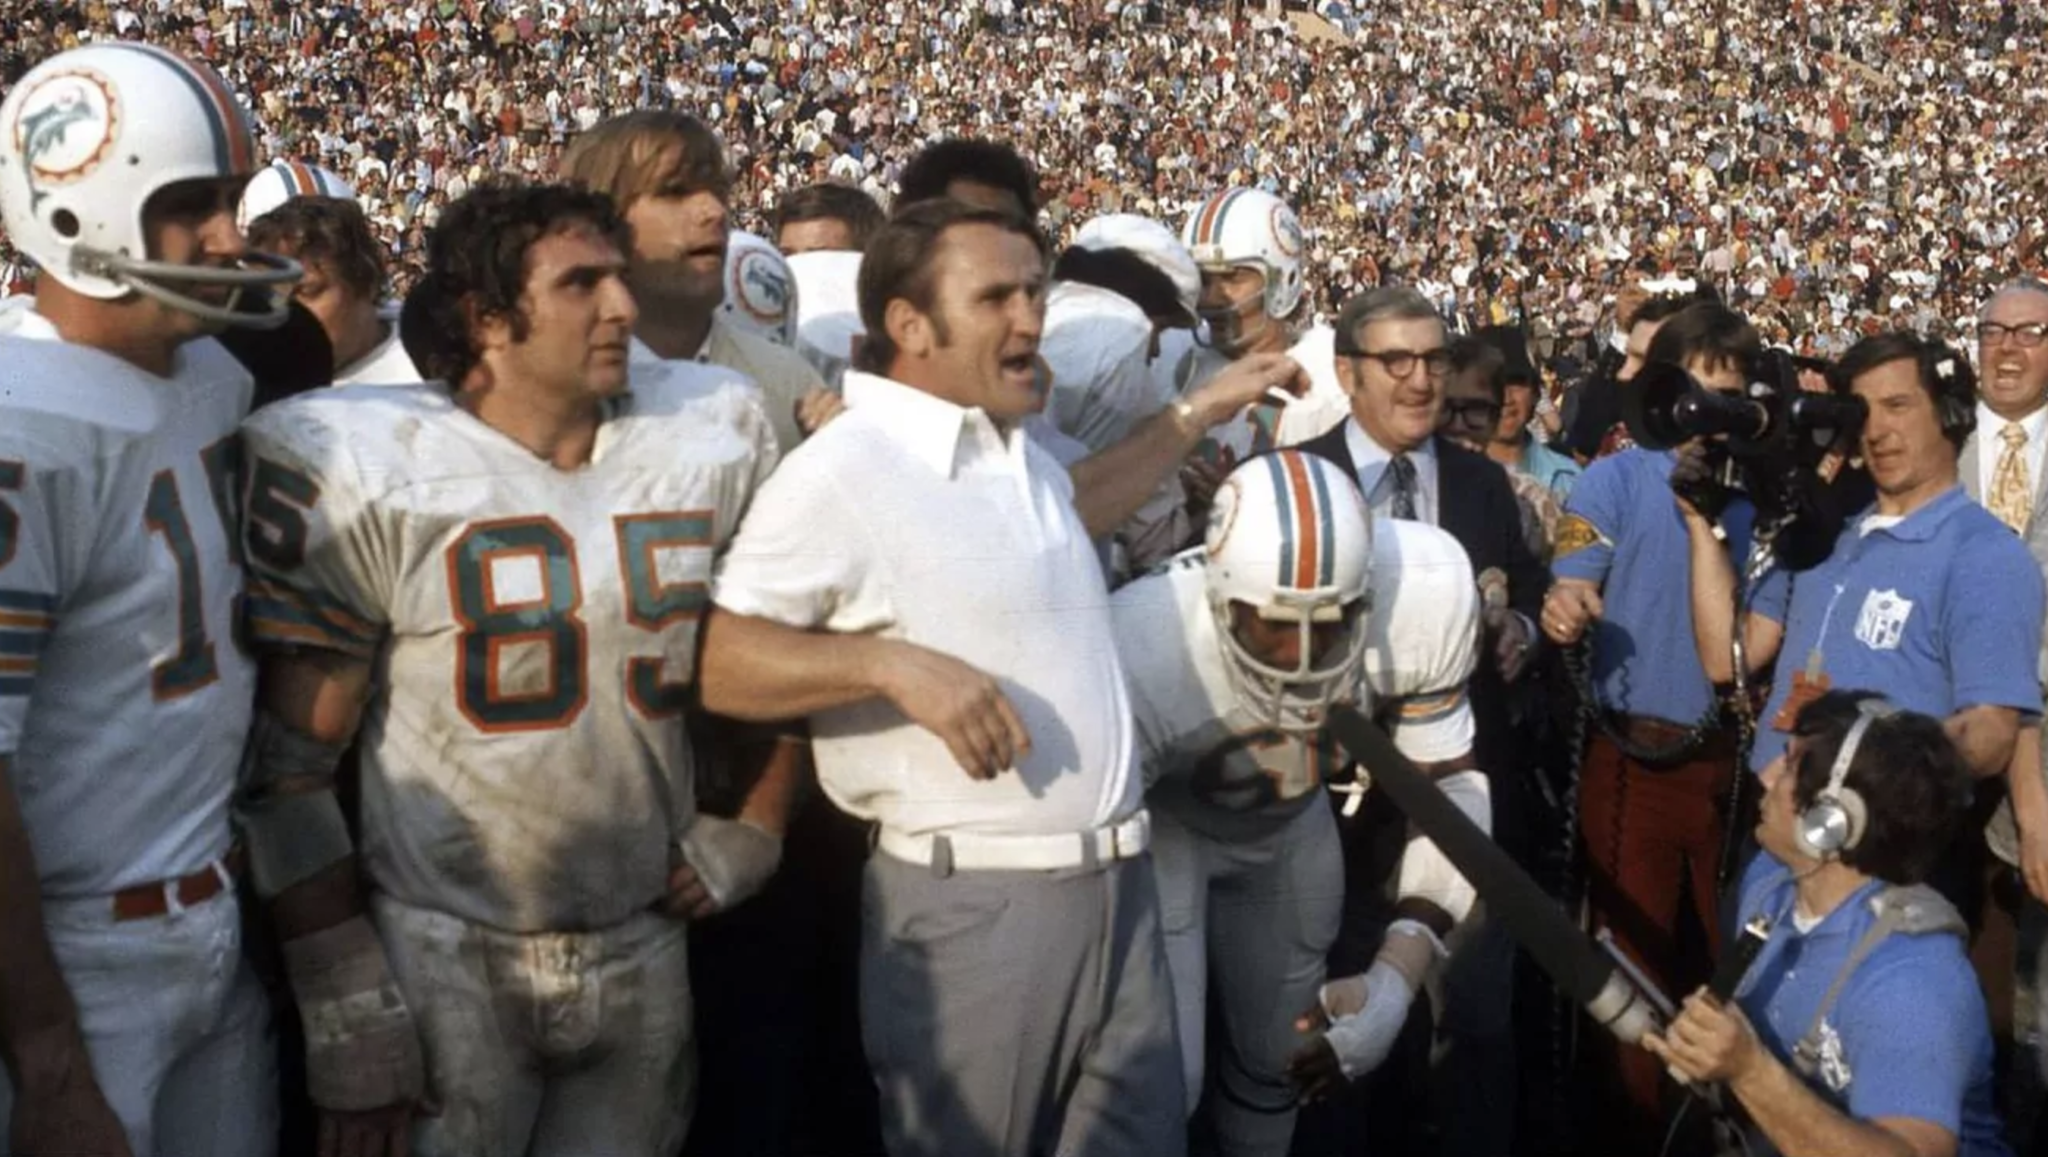 The 1972 Miami Dolphins with Don Shula at the helm